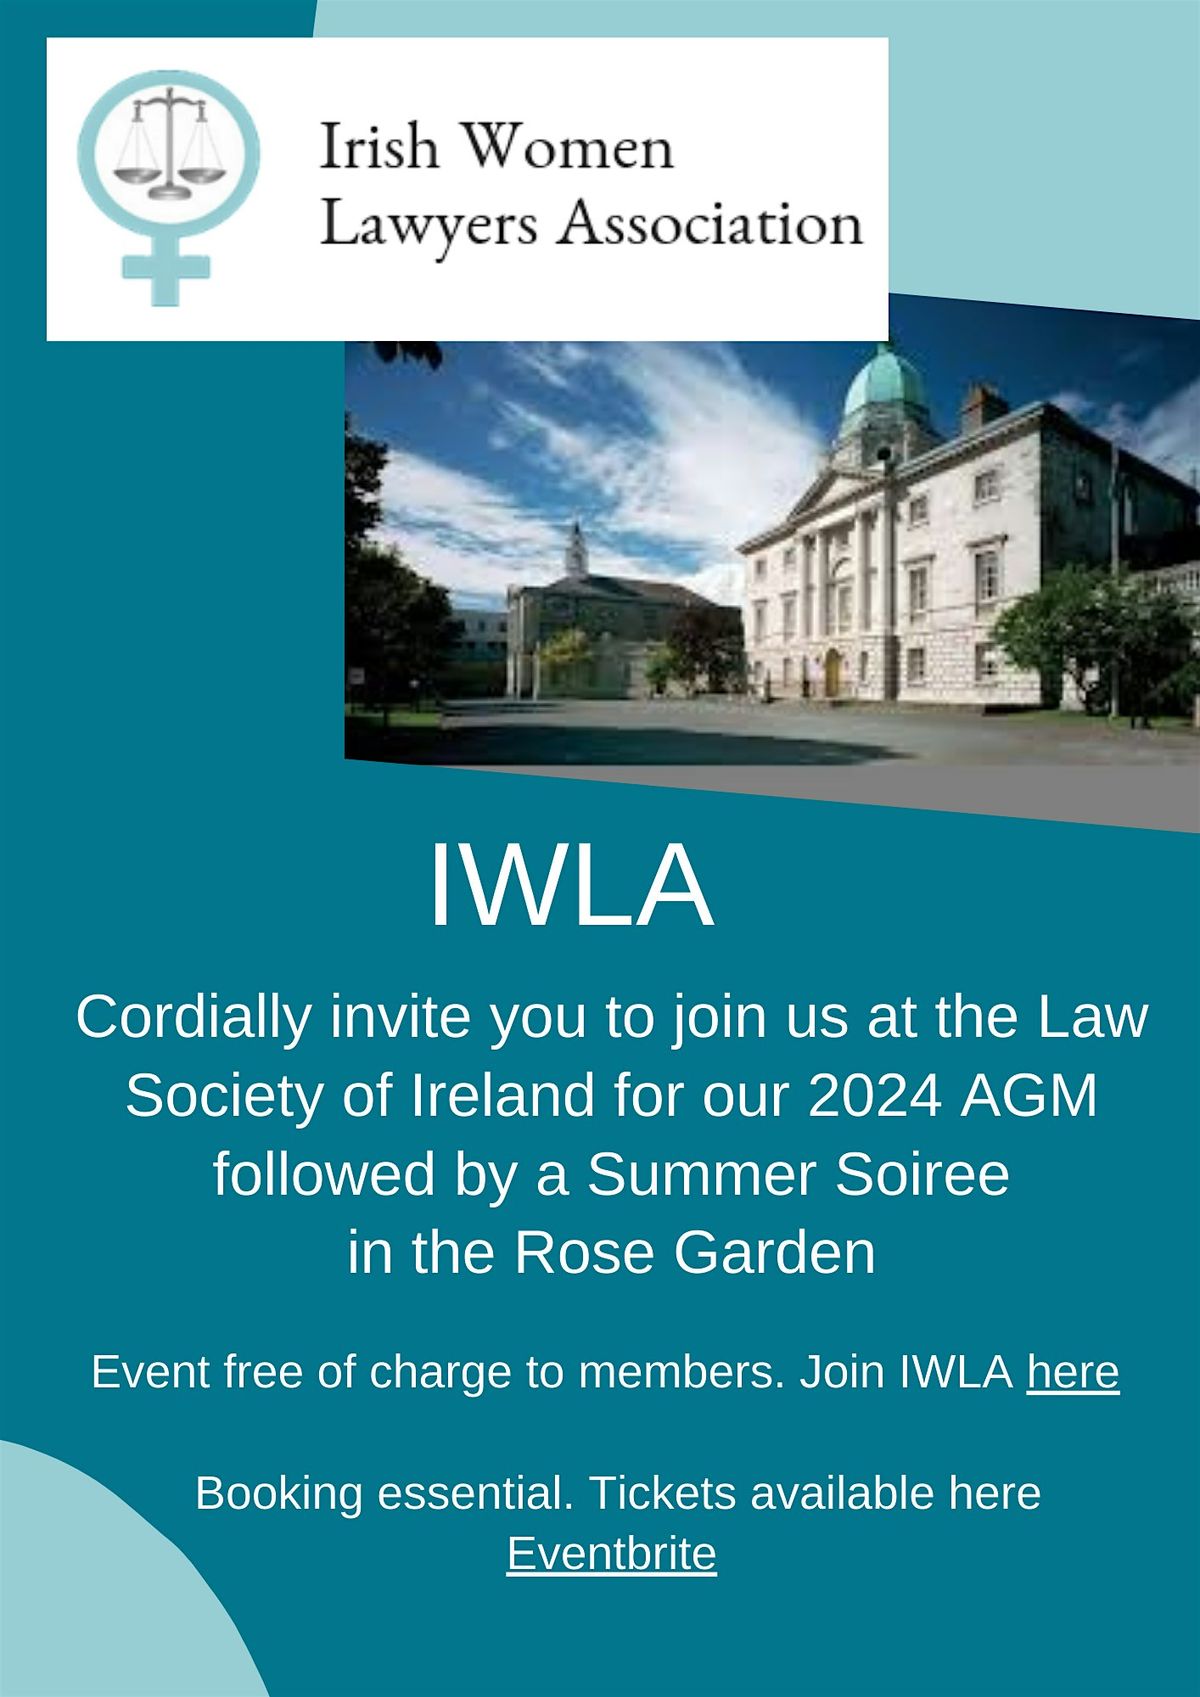 IWLA AGM and Summer Soiree